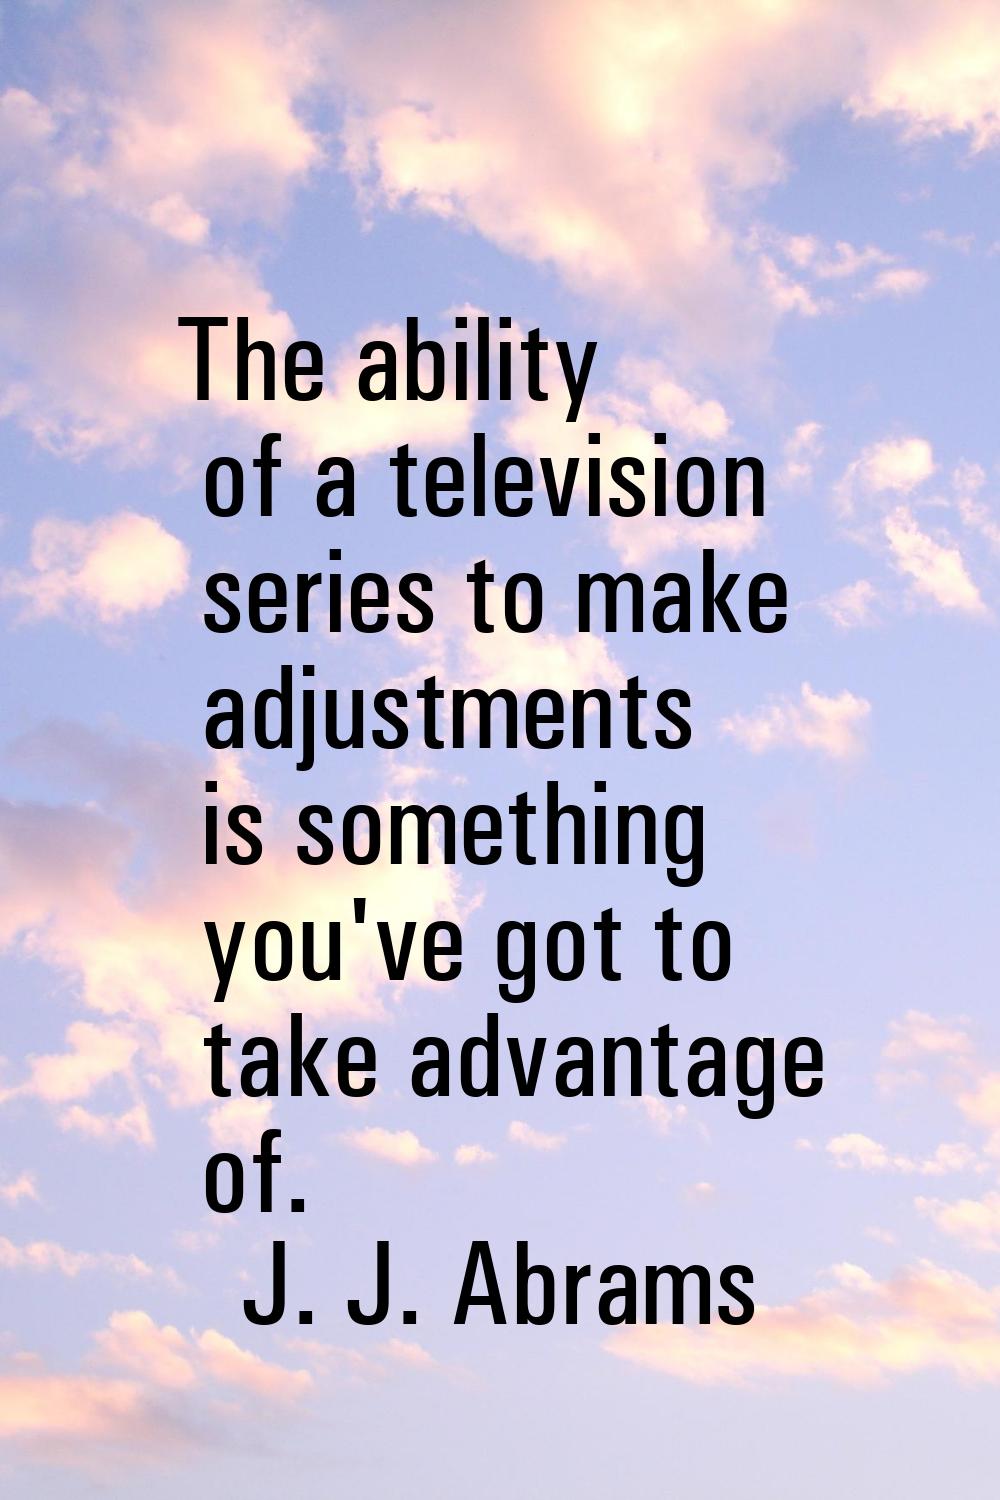 The ability of a television series to make adjustments is something you've got to take advantage of